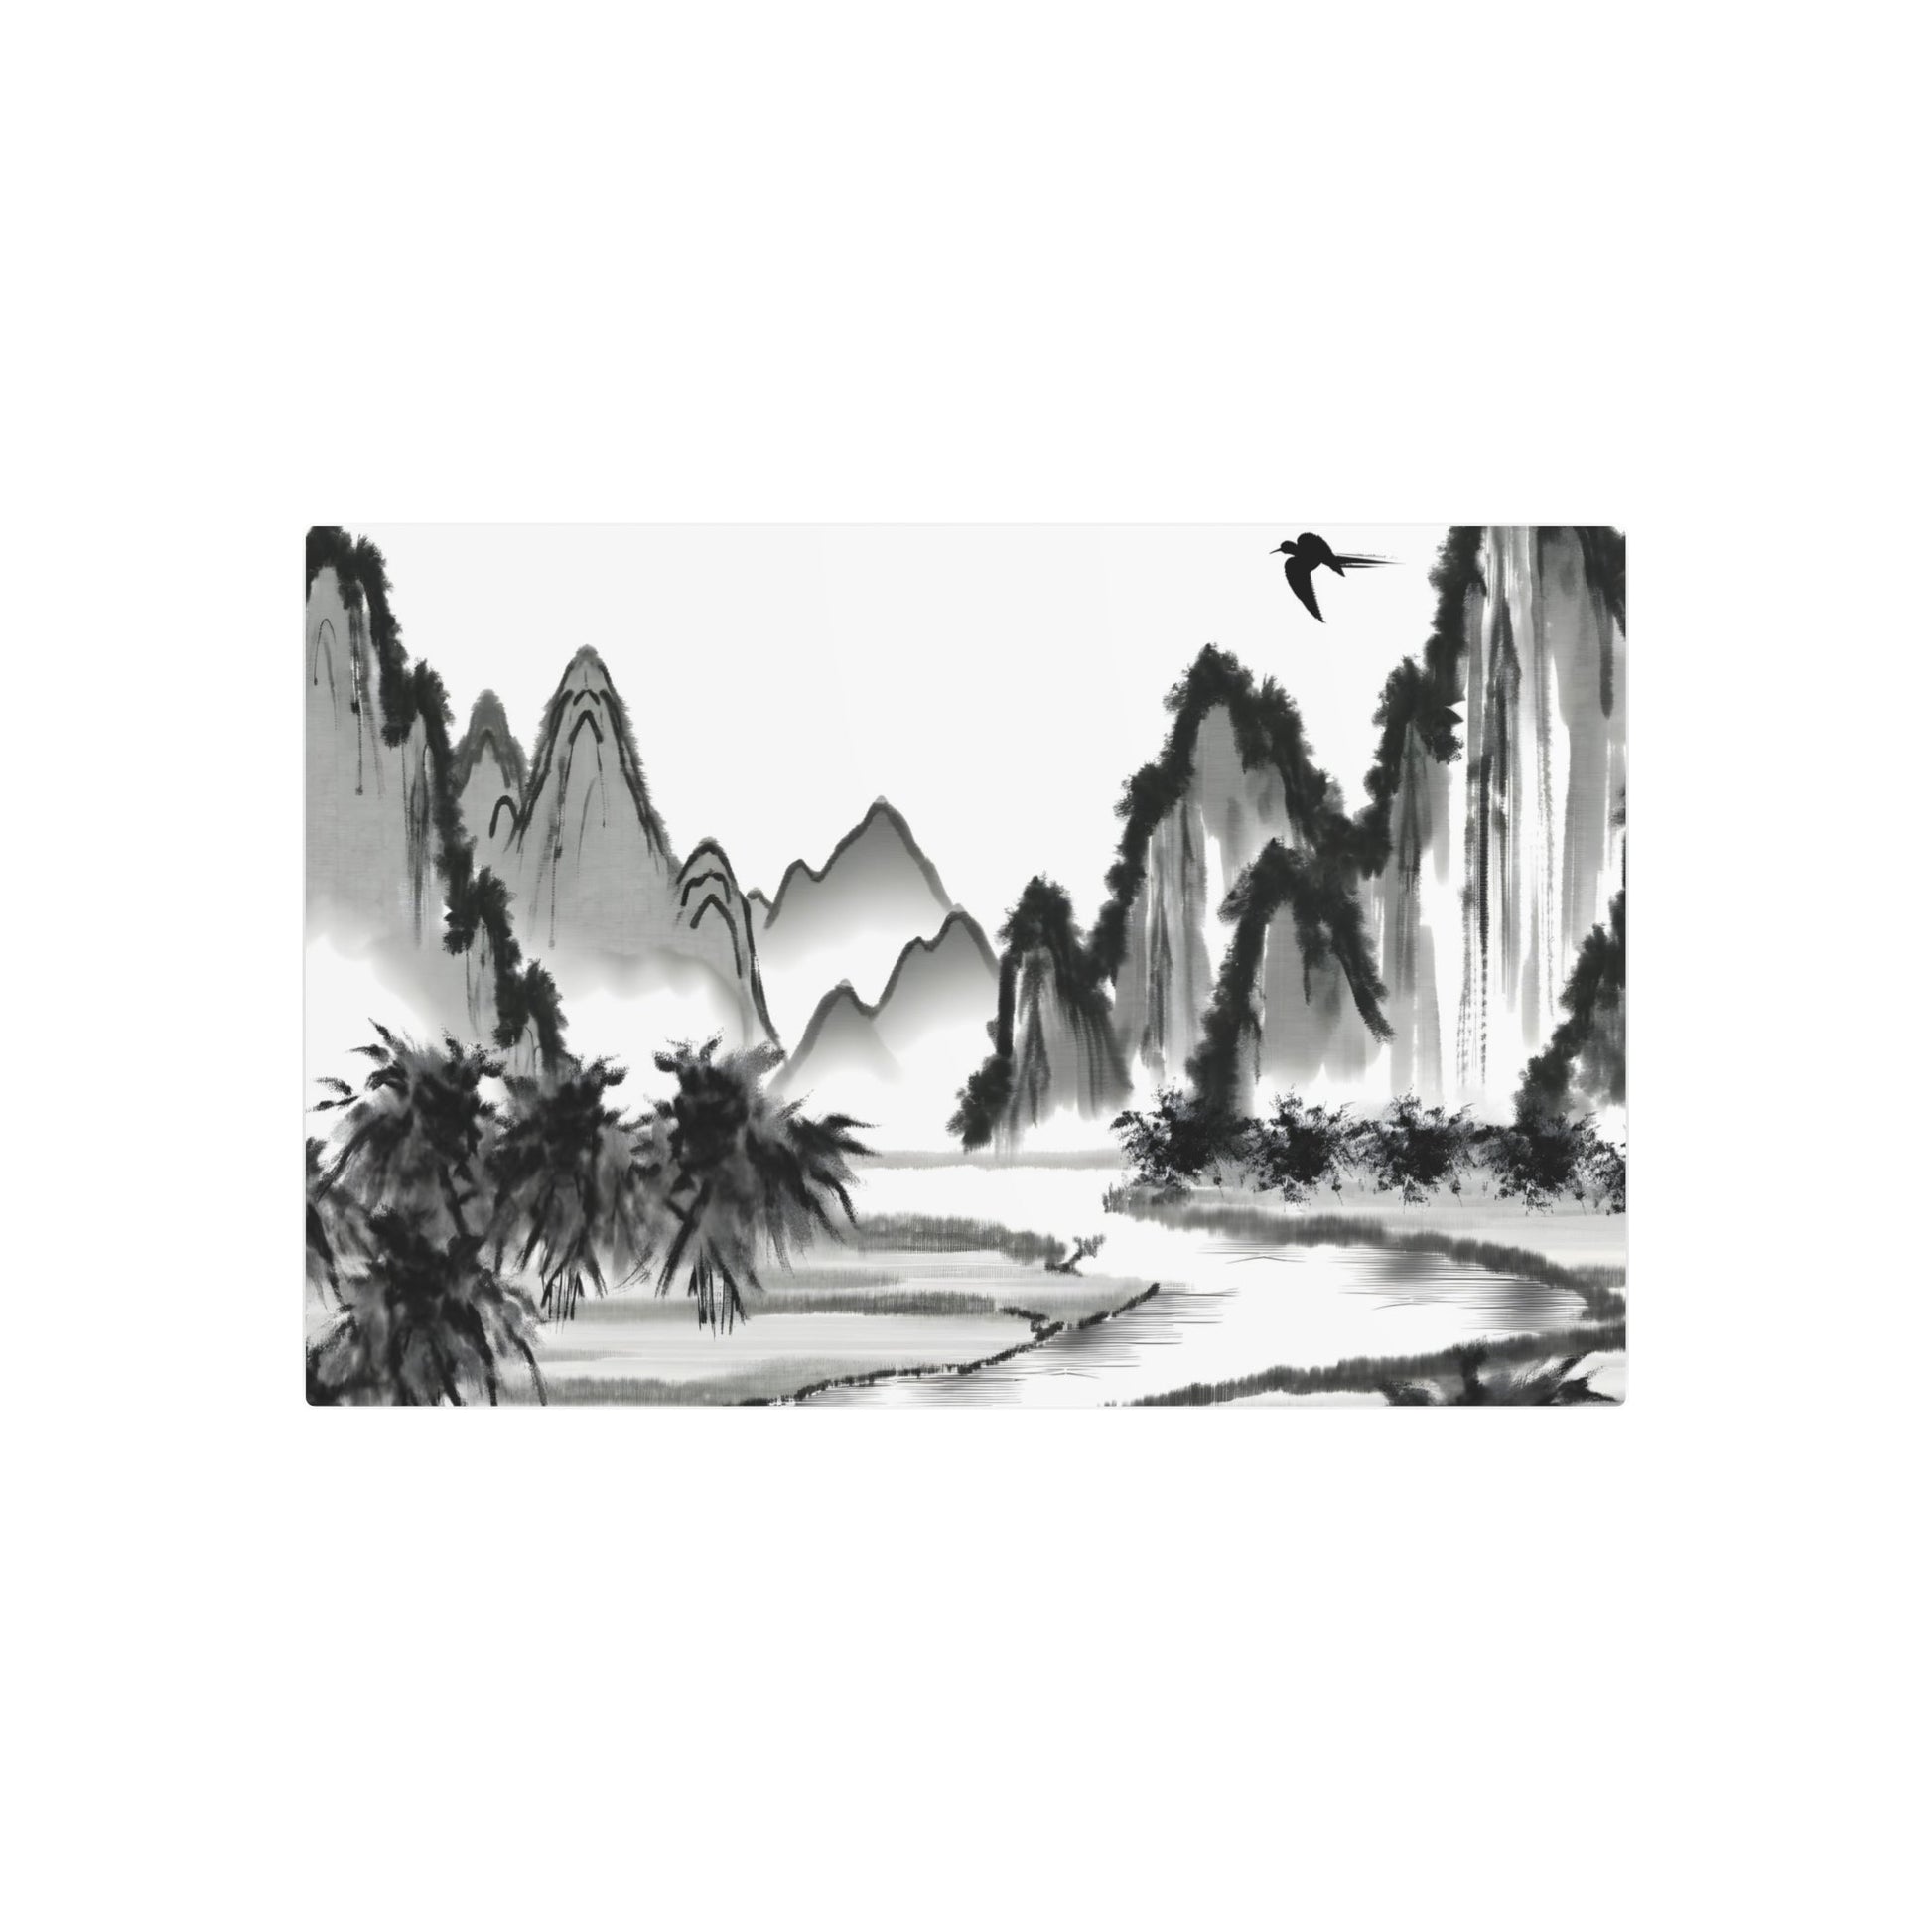 Metal Poster Art | "Traditional Chinese Landscape Art - Serene Countryside with Tall Mountains, Tranquil River, Lush Tree & Bird in Flight - Asian Art Styles Collection - Metal Poster Art 36″ x 24″ (Horizontal) 0.12''